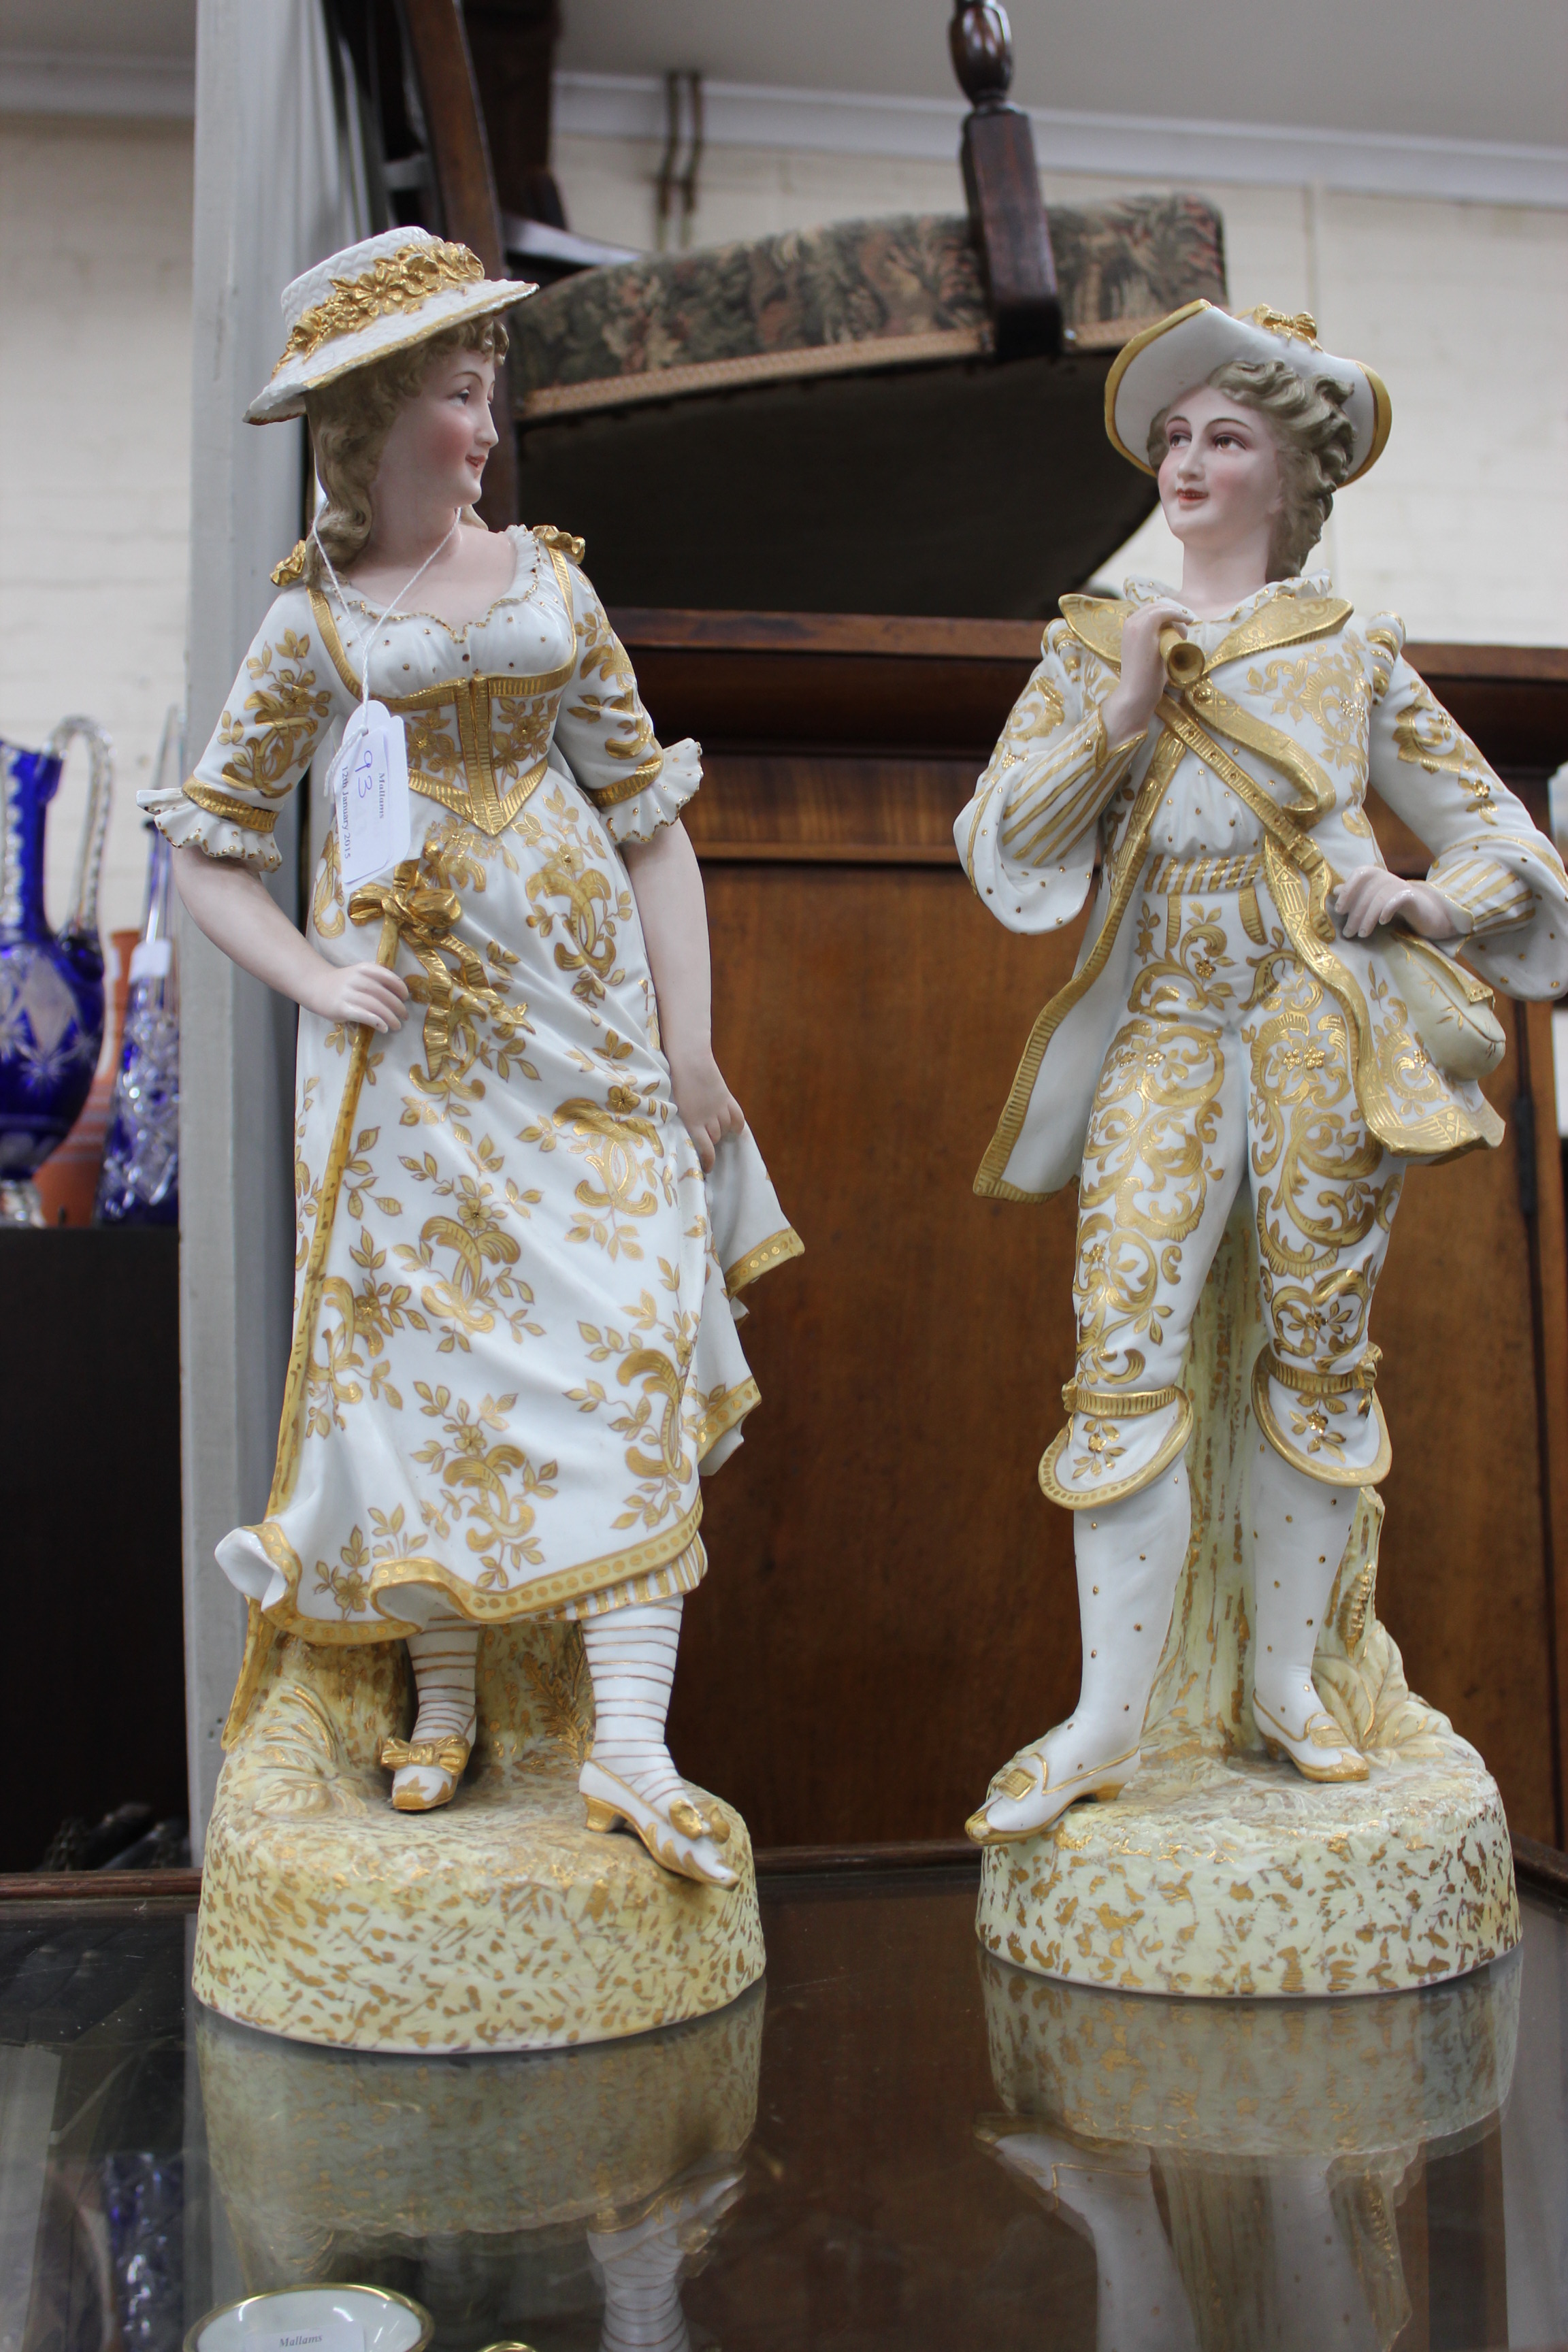 A PAIR OF 20TH CENTURY CONTINENTAL PORCELAIN LARGE FIGURES, a gentleman in a hat with a frilly